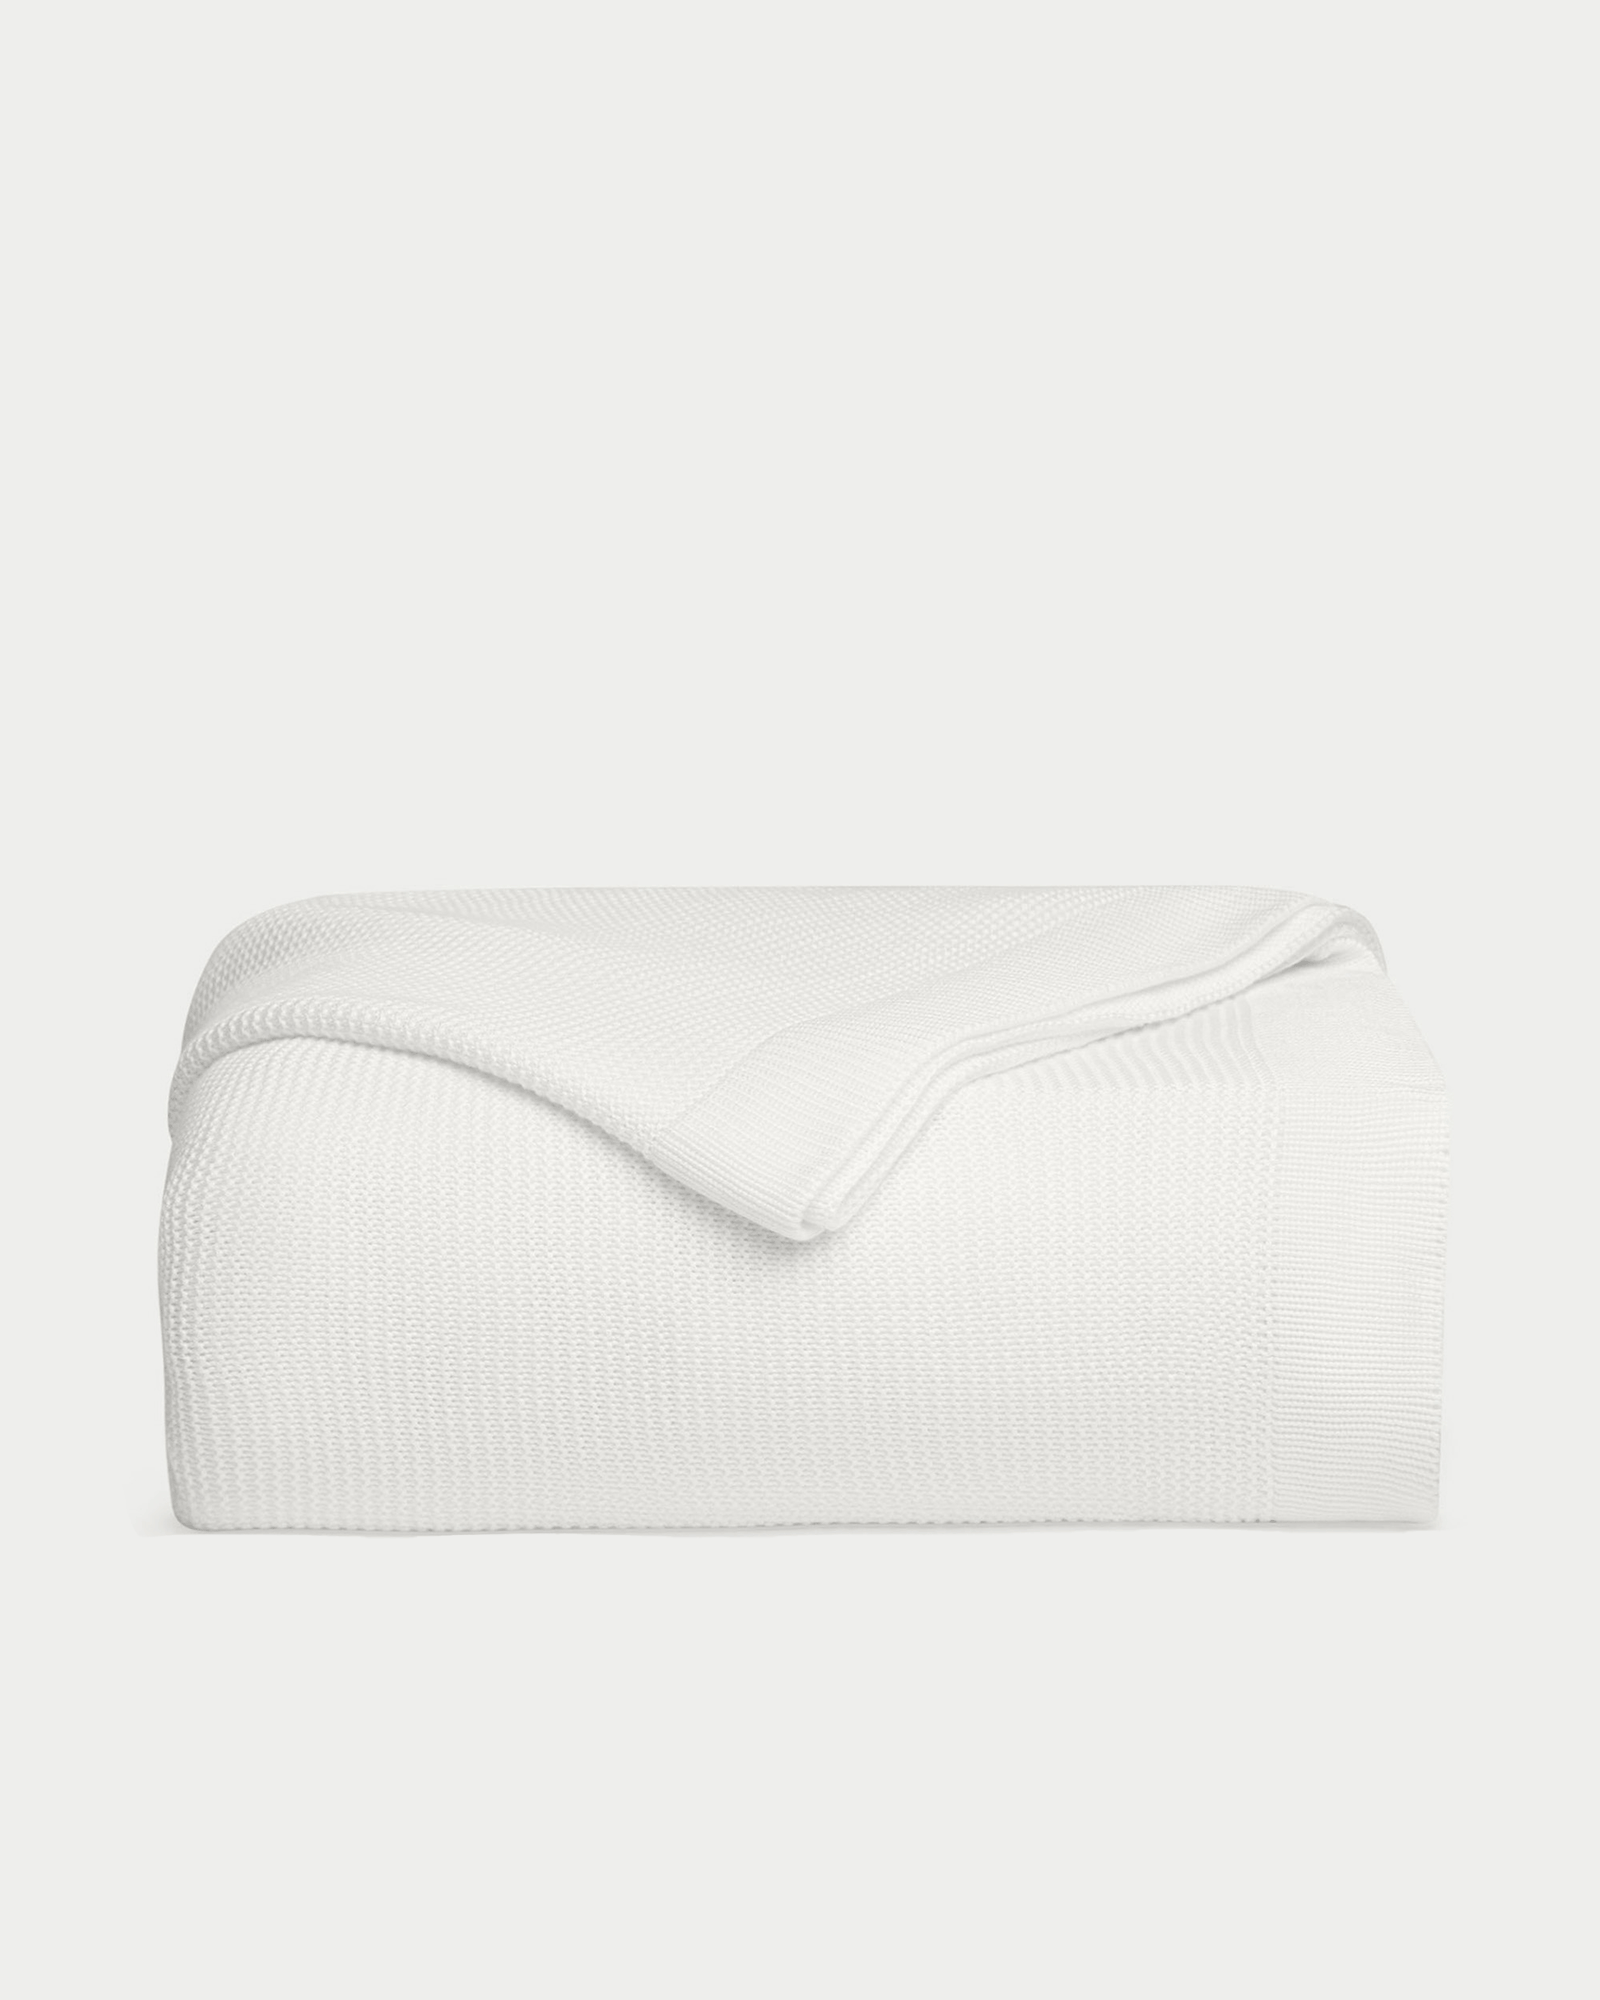 White cloud knit blanket folded with white background 